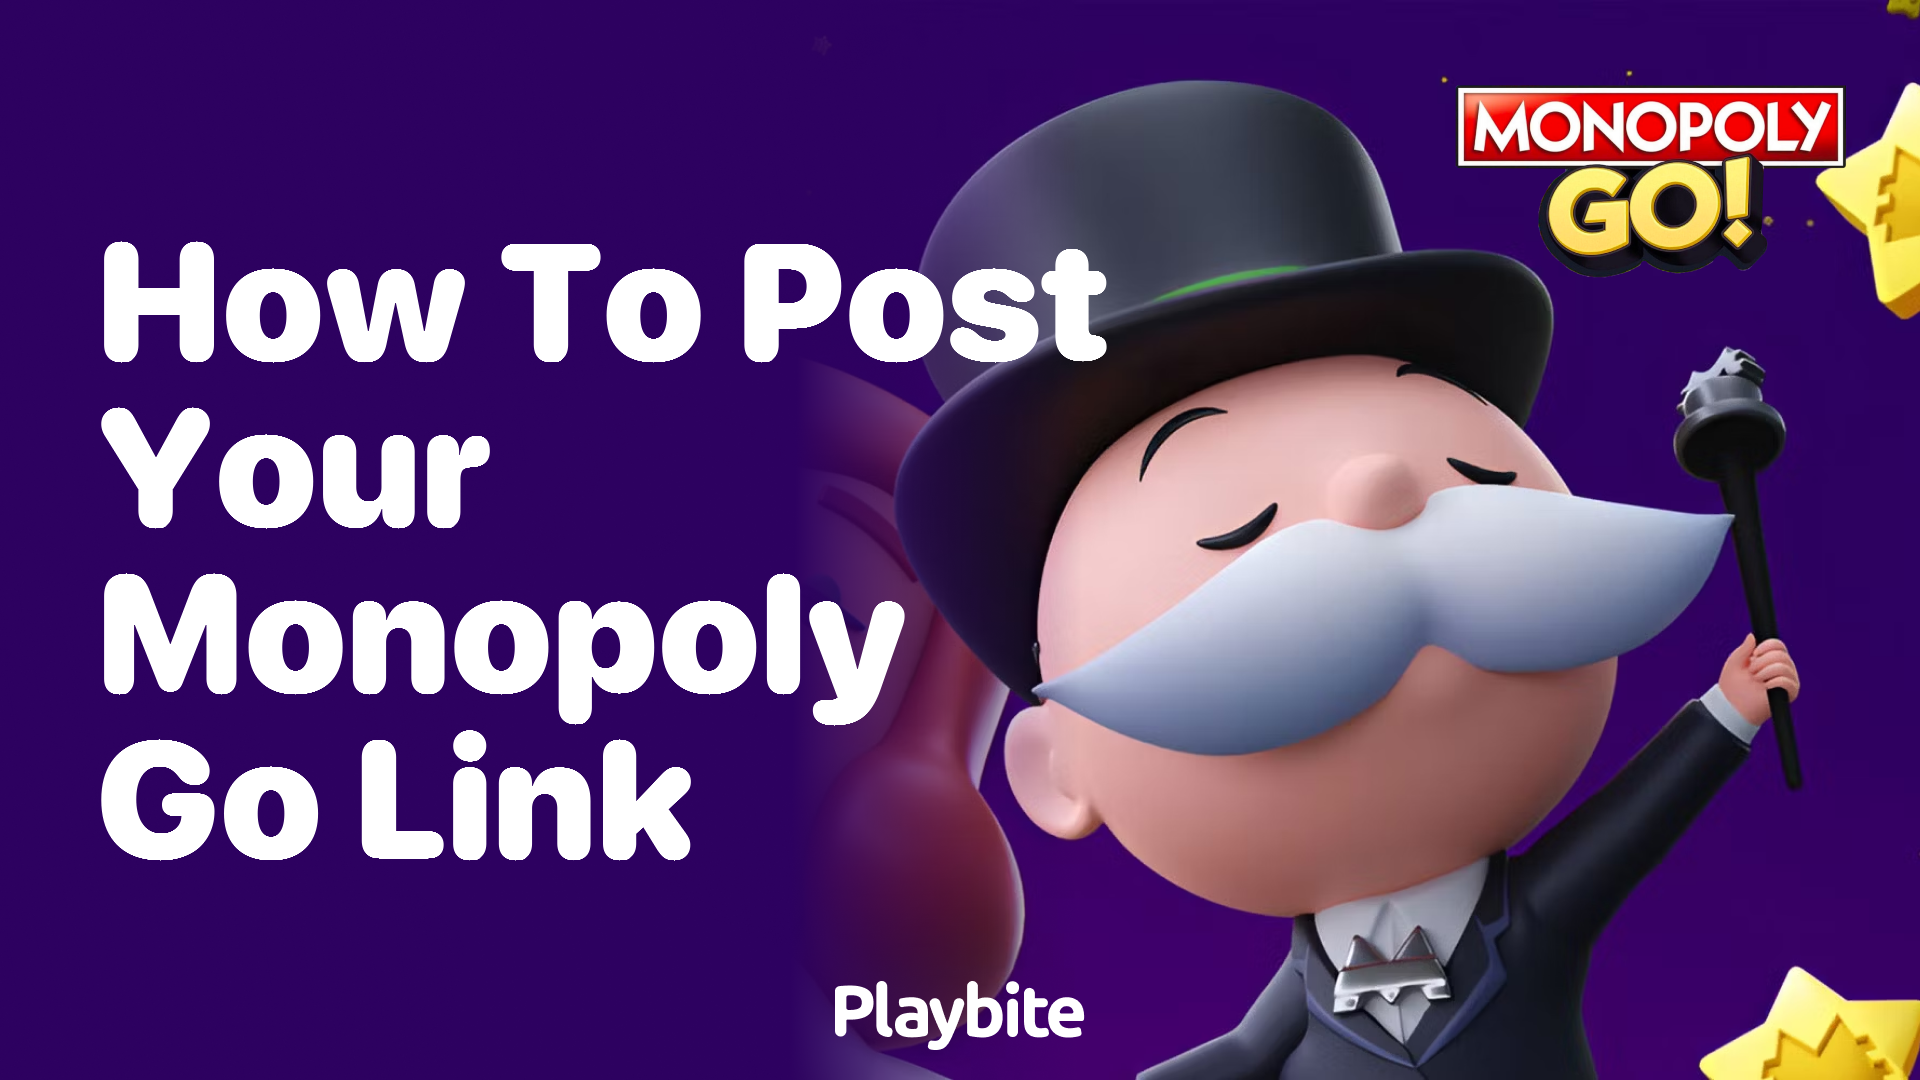 How to Post Your Monopoly Go Link: A Quick Guide